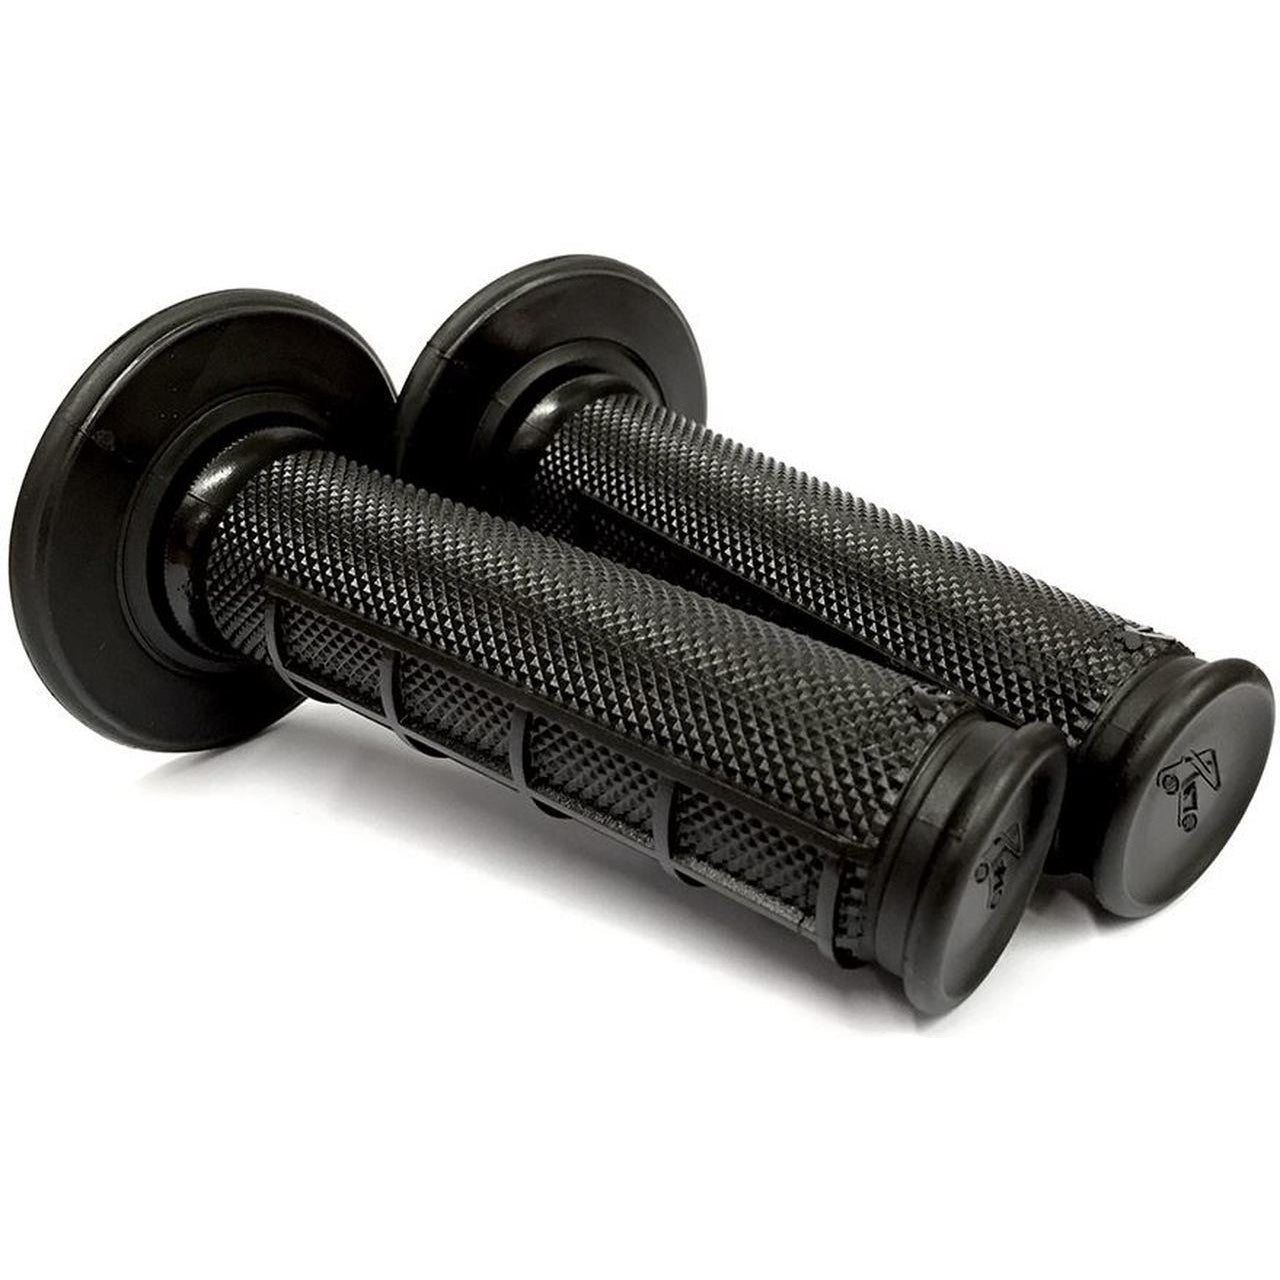 Renthal Ultra Tacky - Dual Compound 50/50 Grips - 1/2 waffle - Renthal